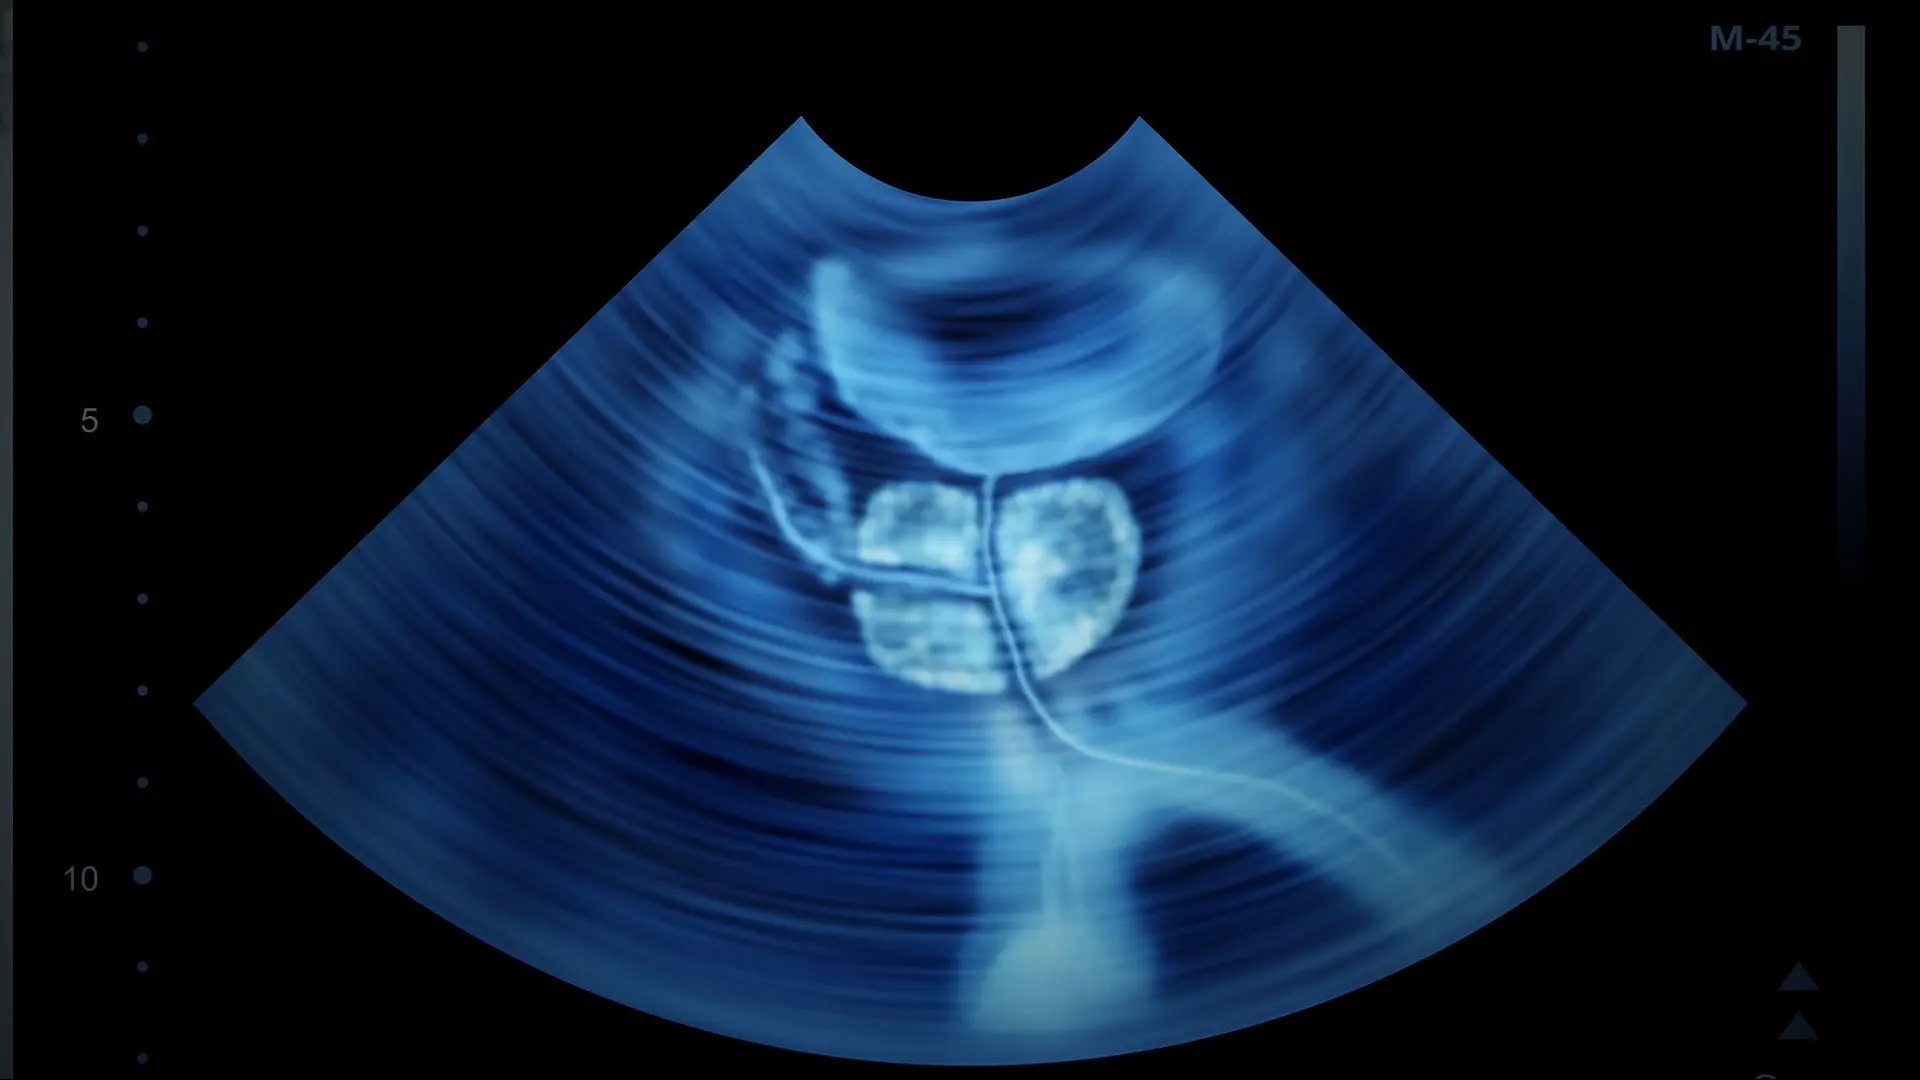 Mount Sinai Begins Offering High-Intensity Focused Ultrasound for Localized Prostate Tumors